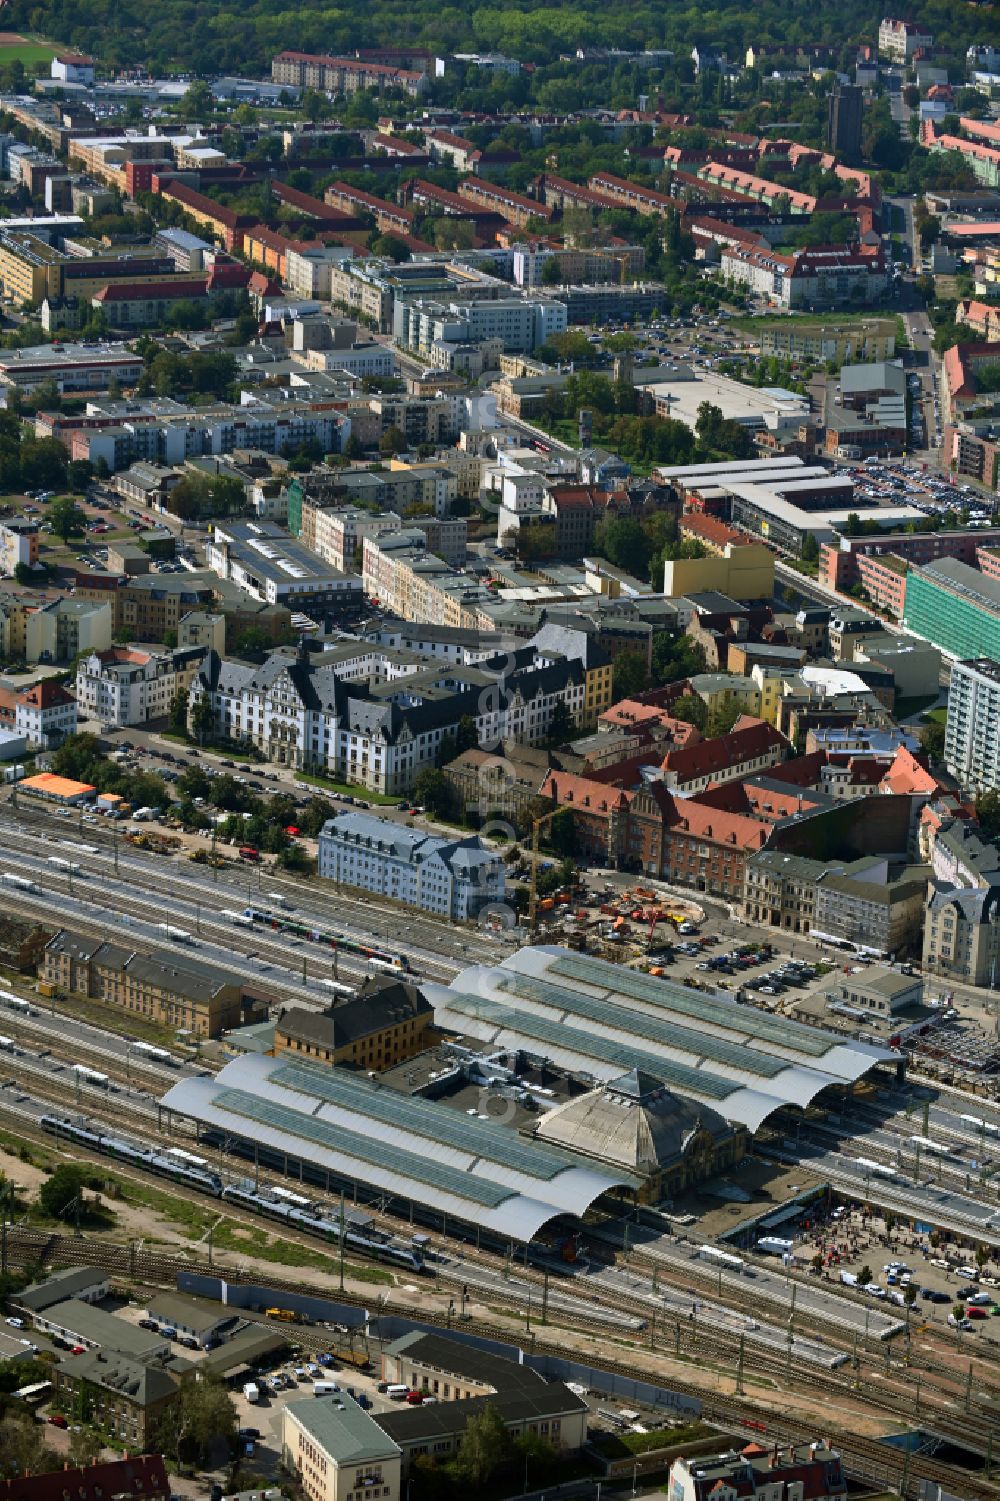 Aerial image Halle (Saale) - Track progress and building of the main station of the railway in Halle (Saale) in the state Saxony-Anhalt, Germany